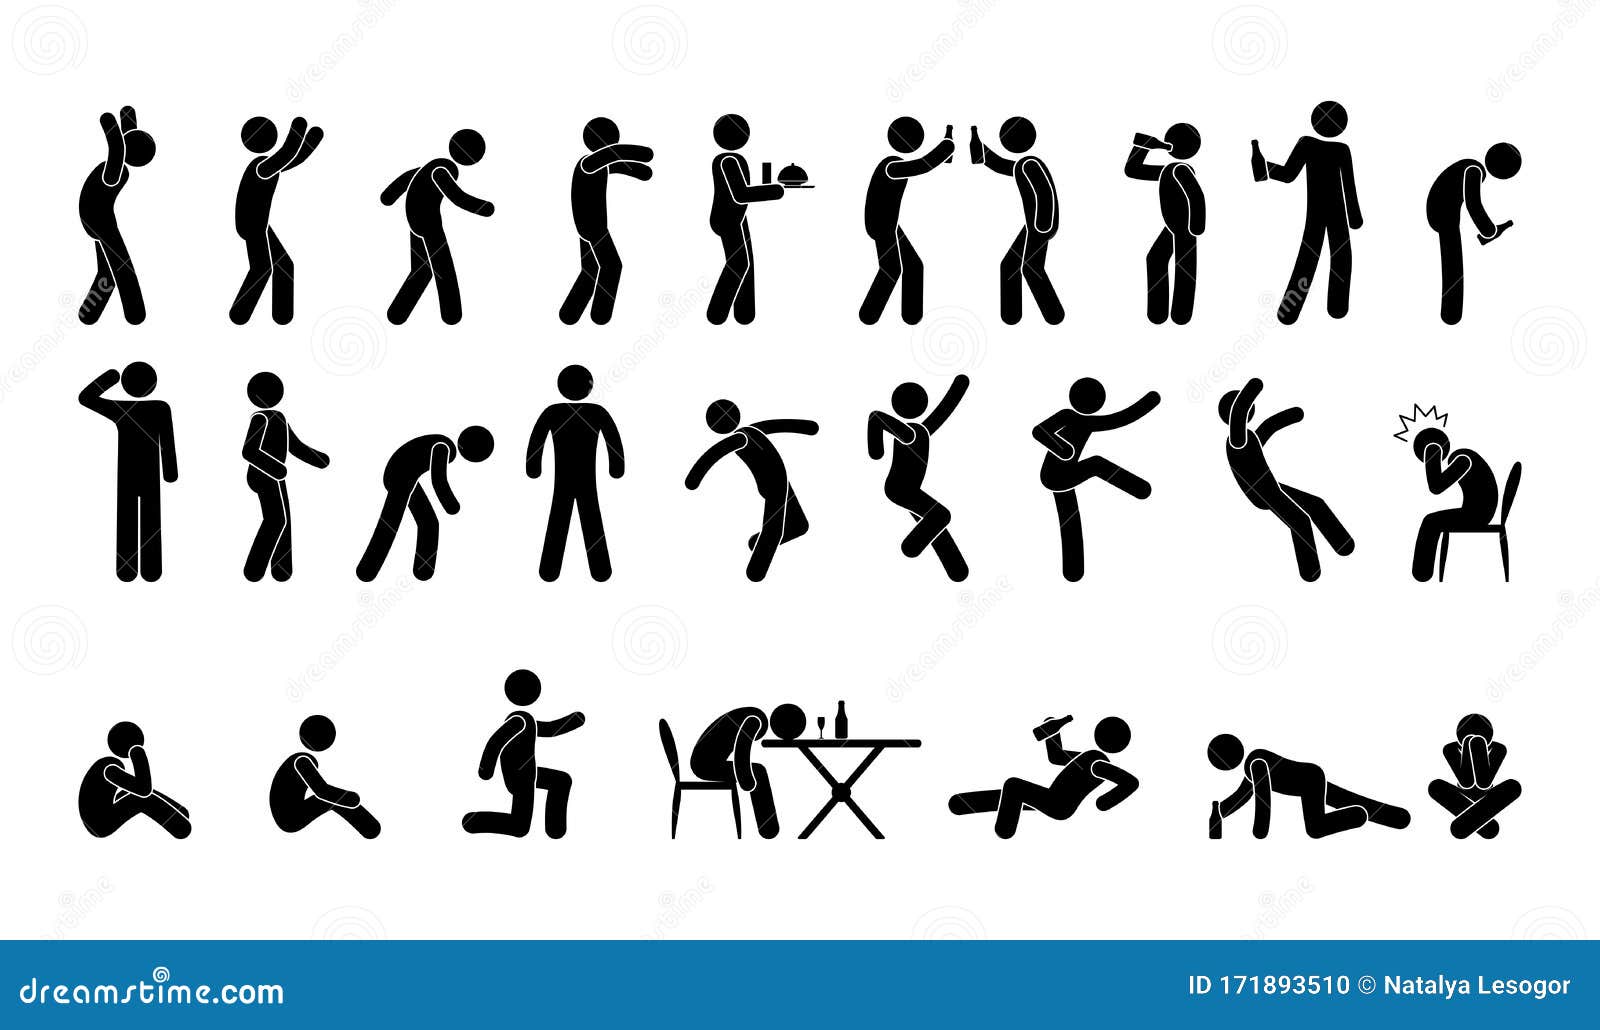 people in various poses, stick figure man icon,  silhouettes, drunk man